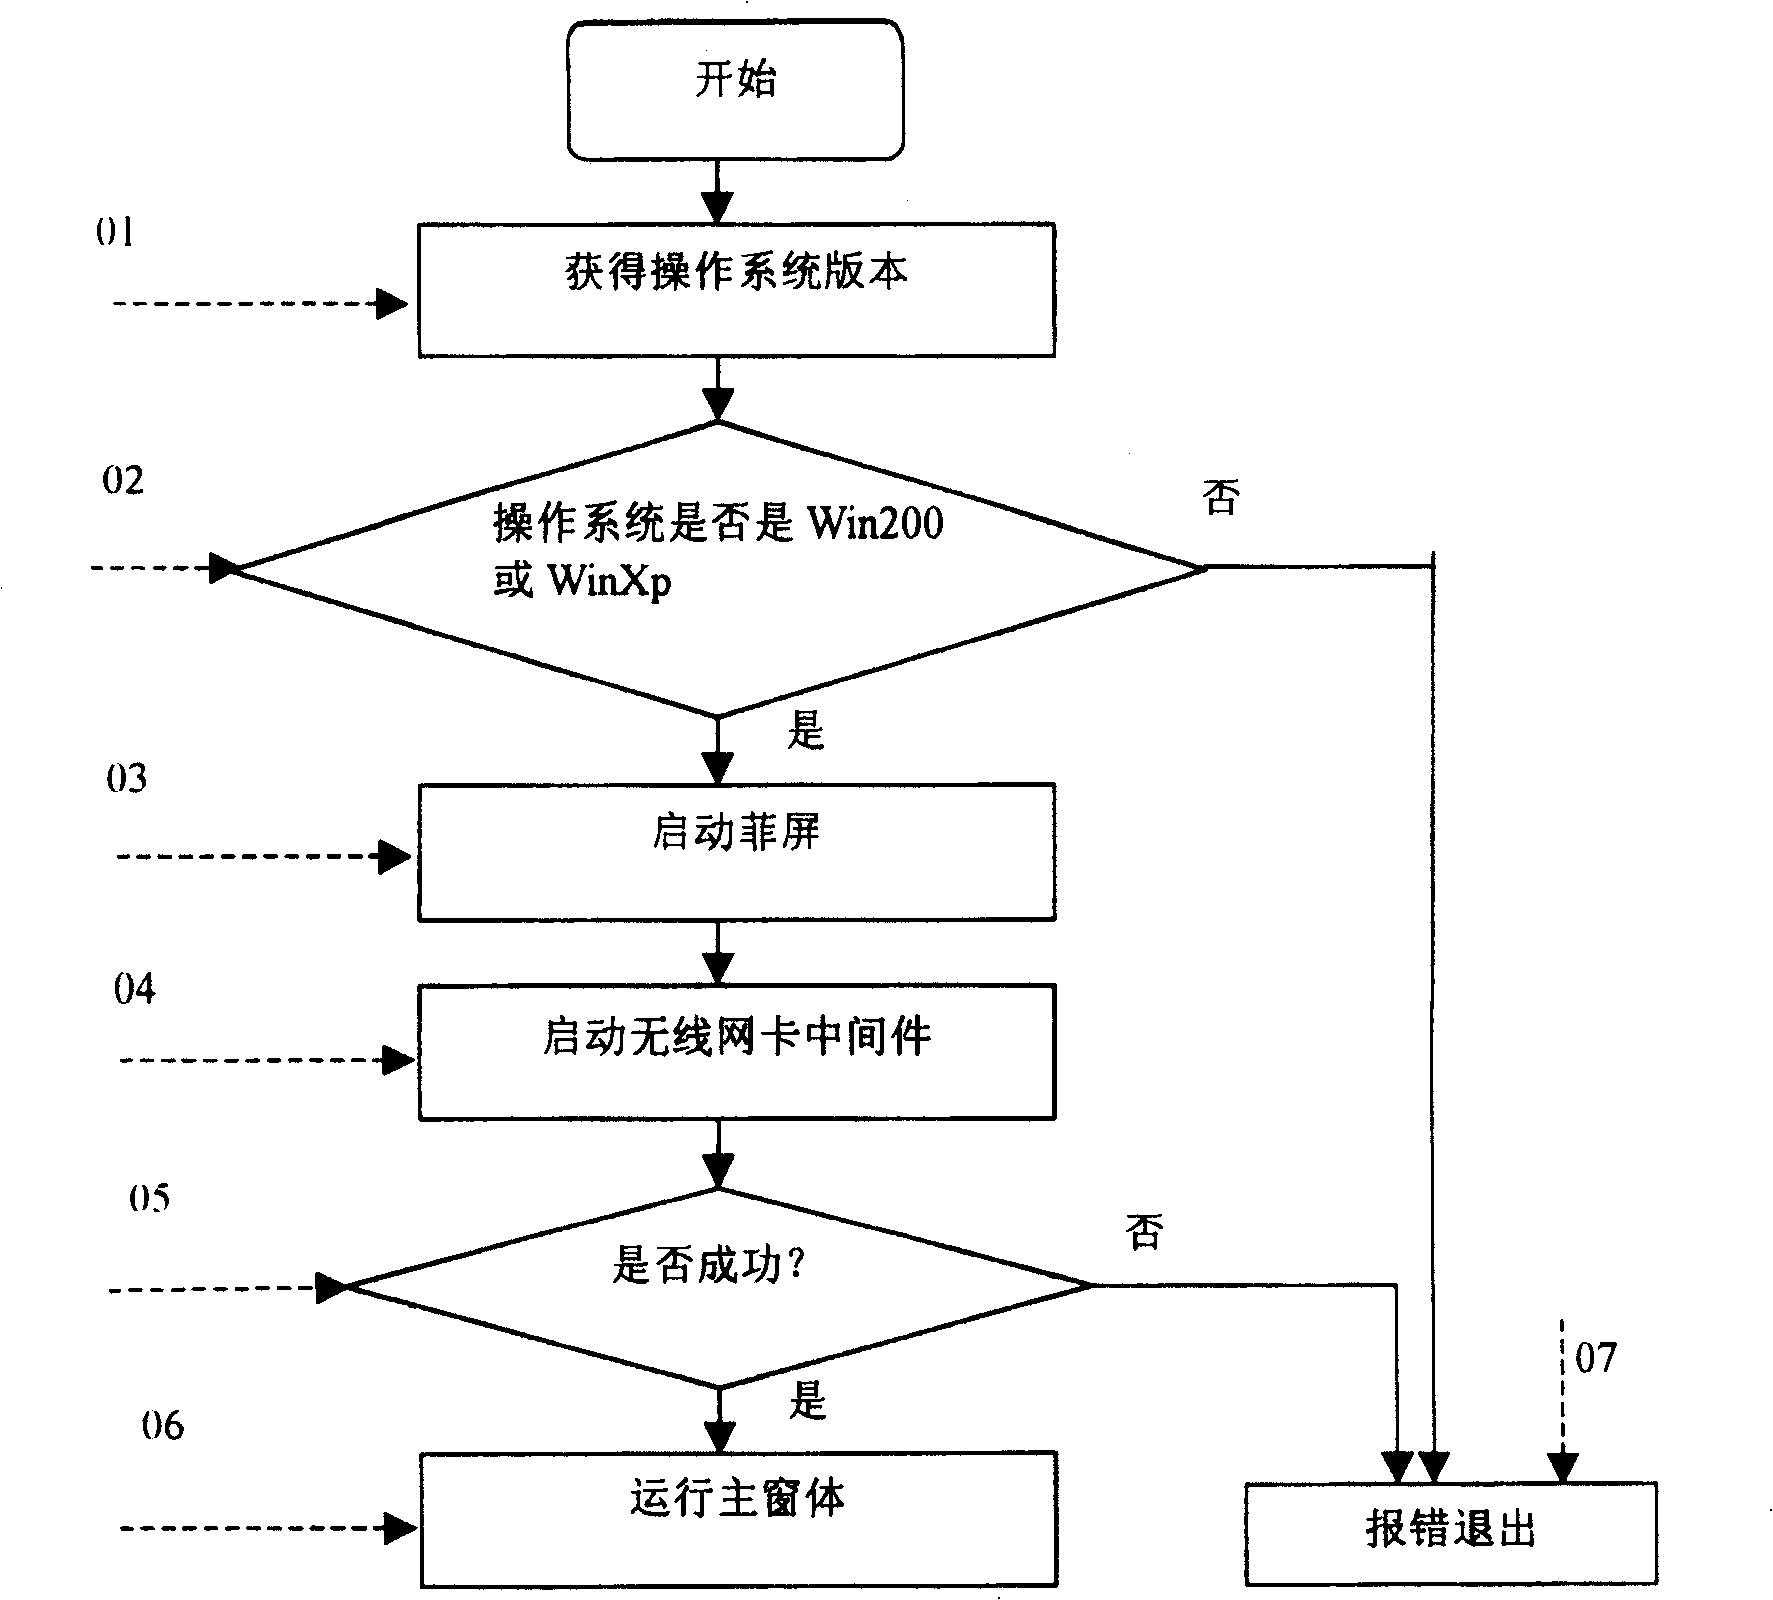 Method for realizing universal configuration of wireless network card based on 802.11 standard